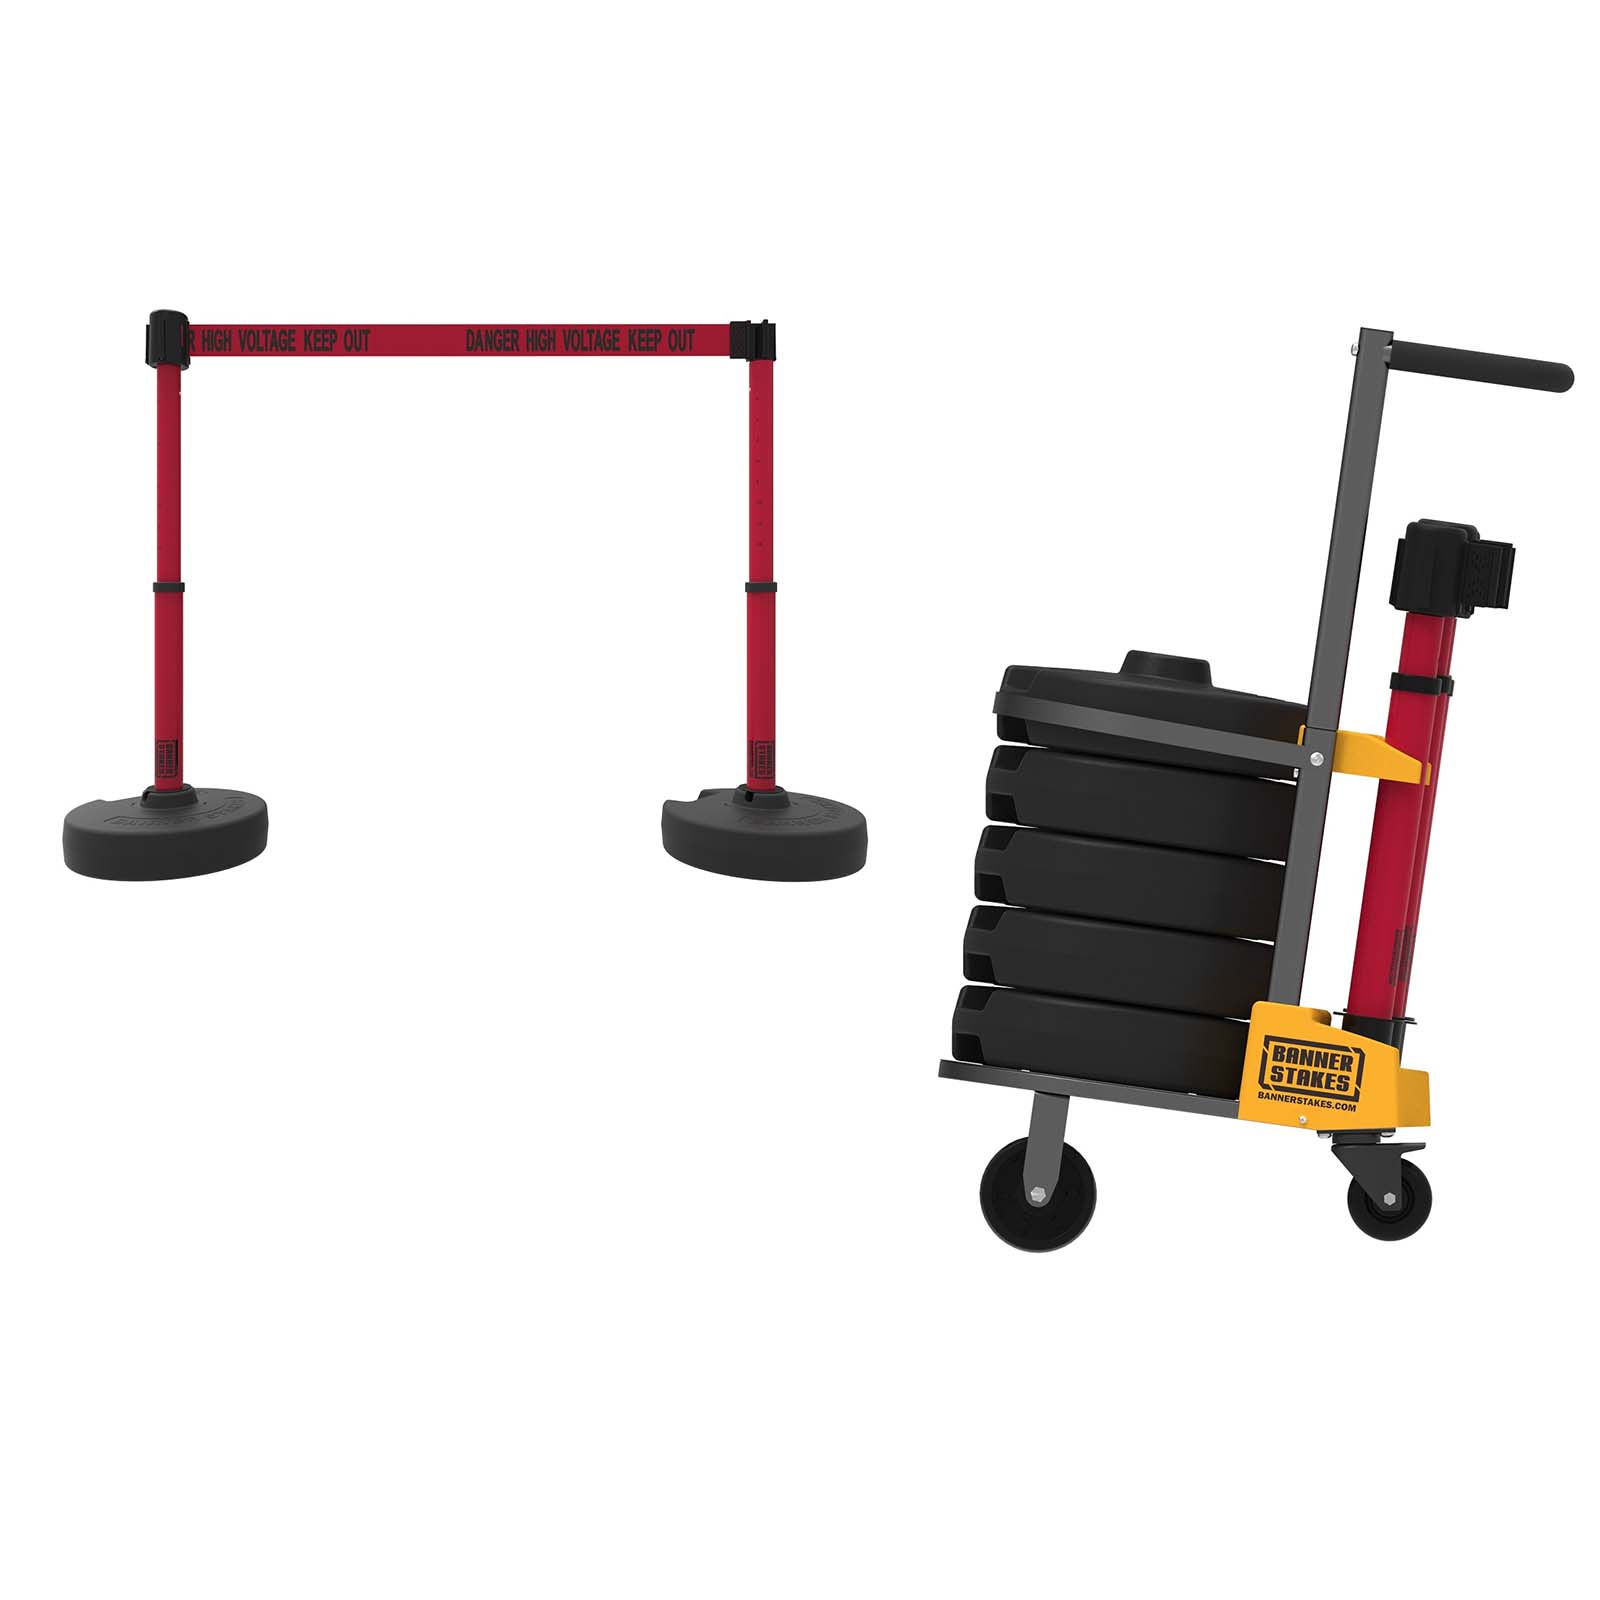 Banner Stakes PL4013 PLUS Cart Package, Red "Danger High Voltage Keep Out" Banner